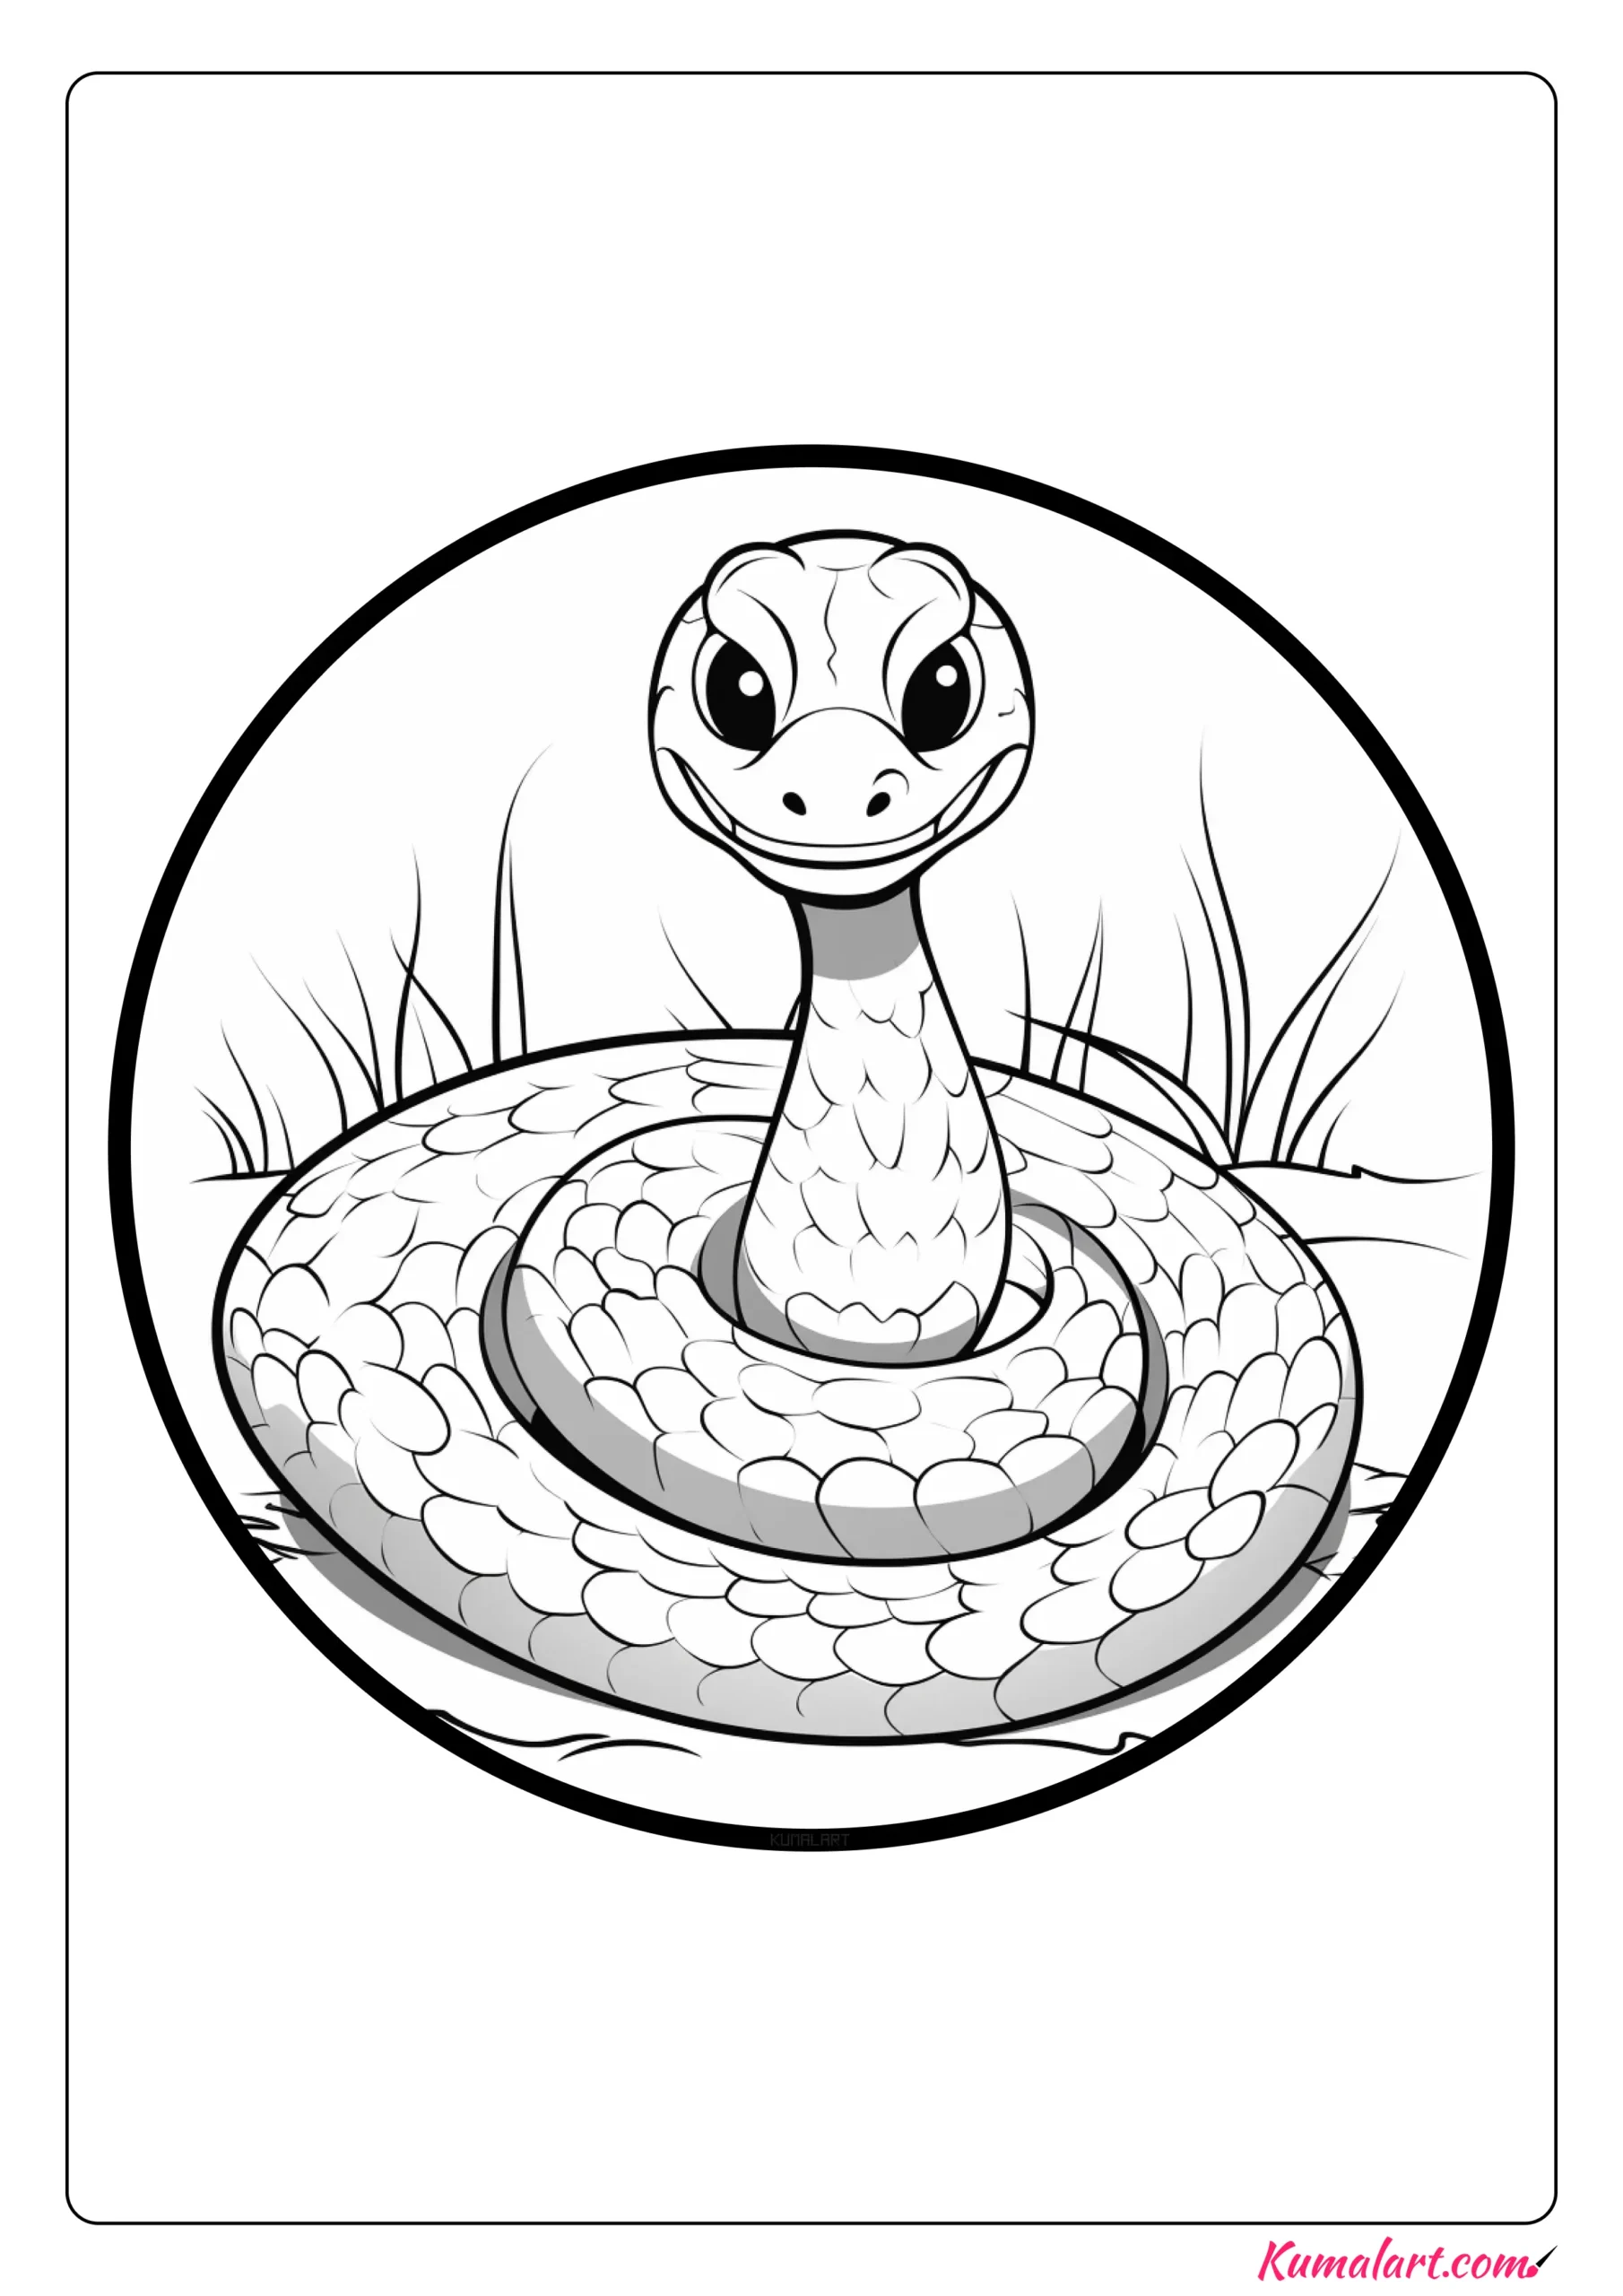 Rattle Snake Coloring Page